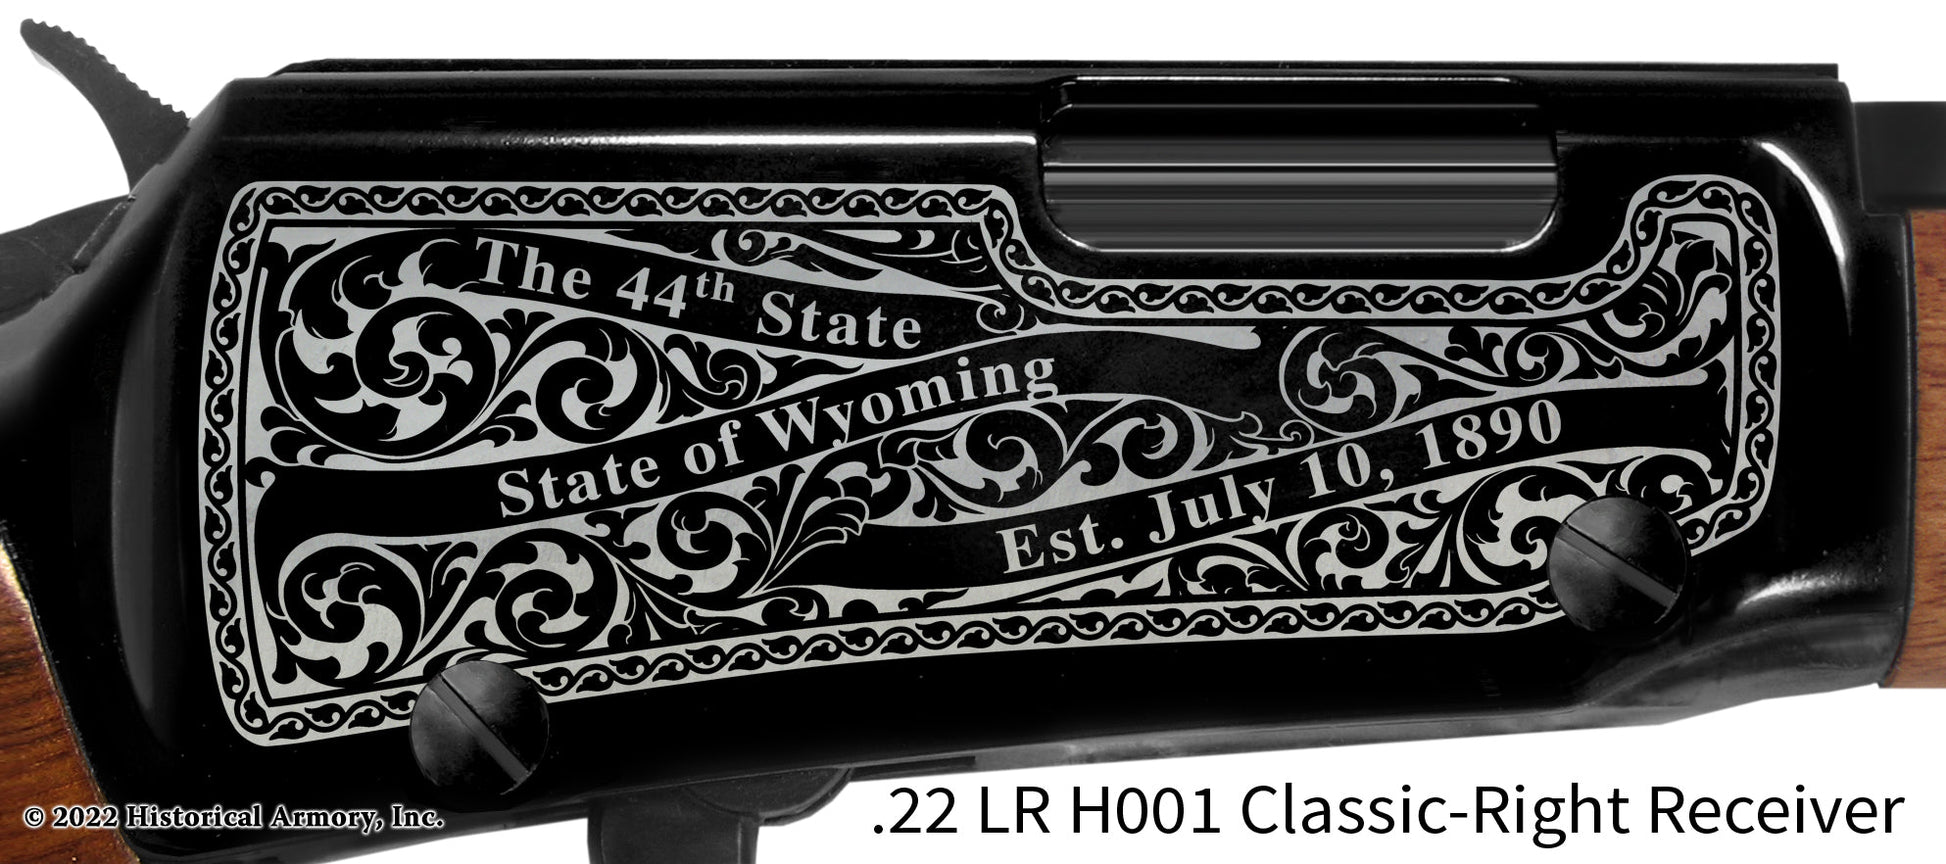 Albany County Wyoming Engraved Henry H001 Rifle